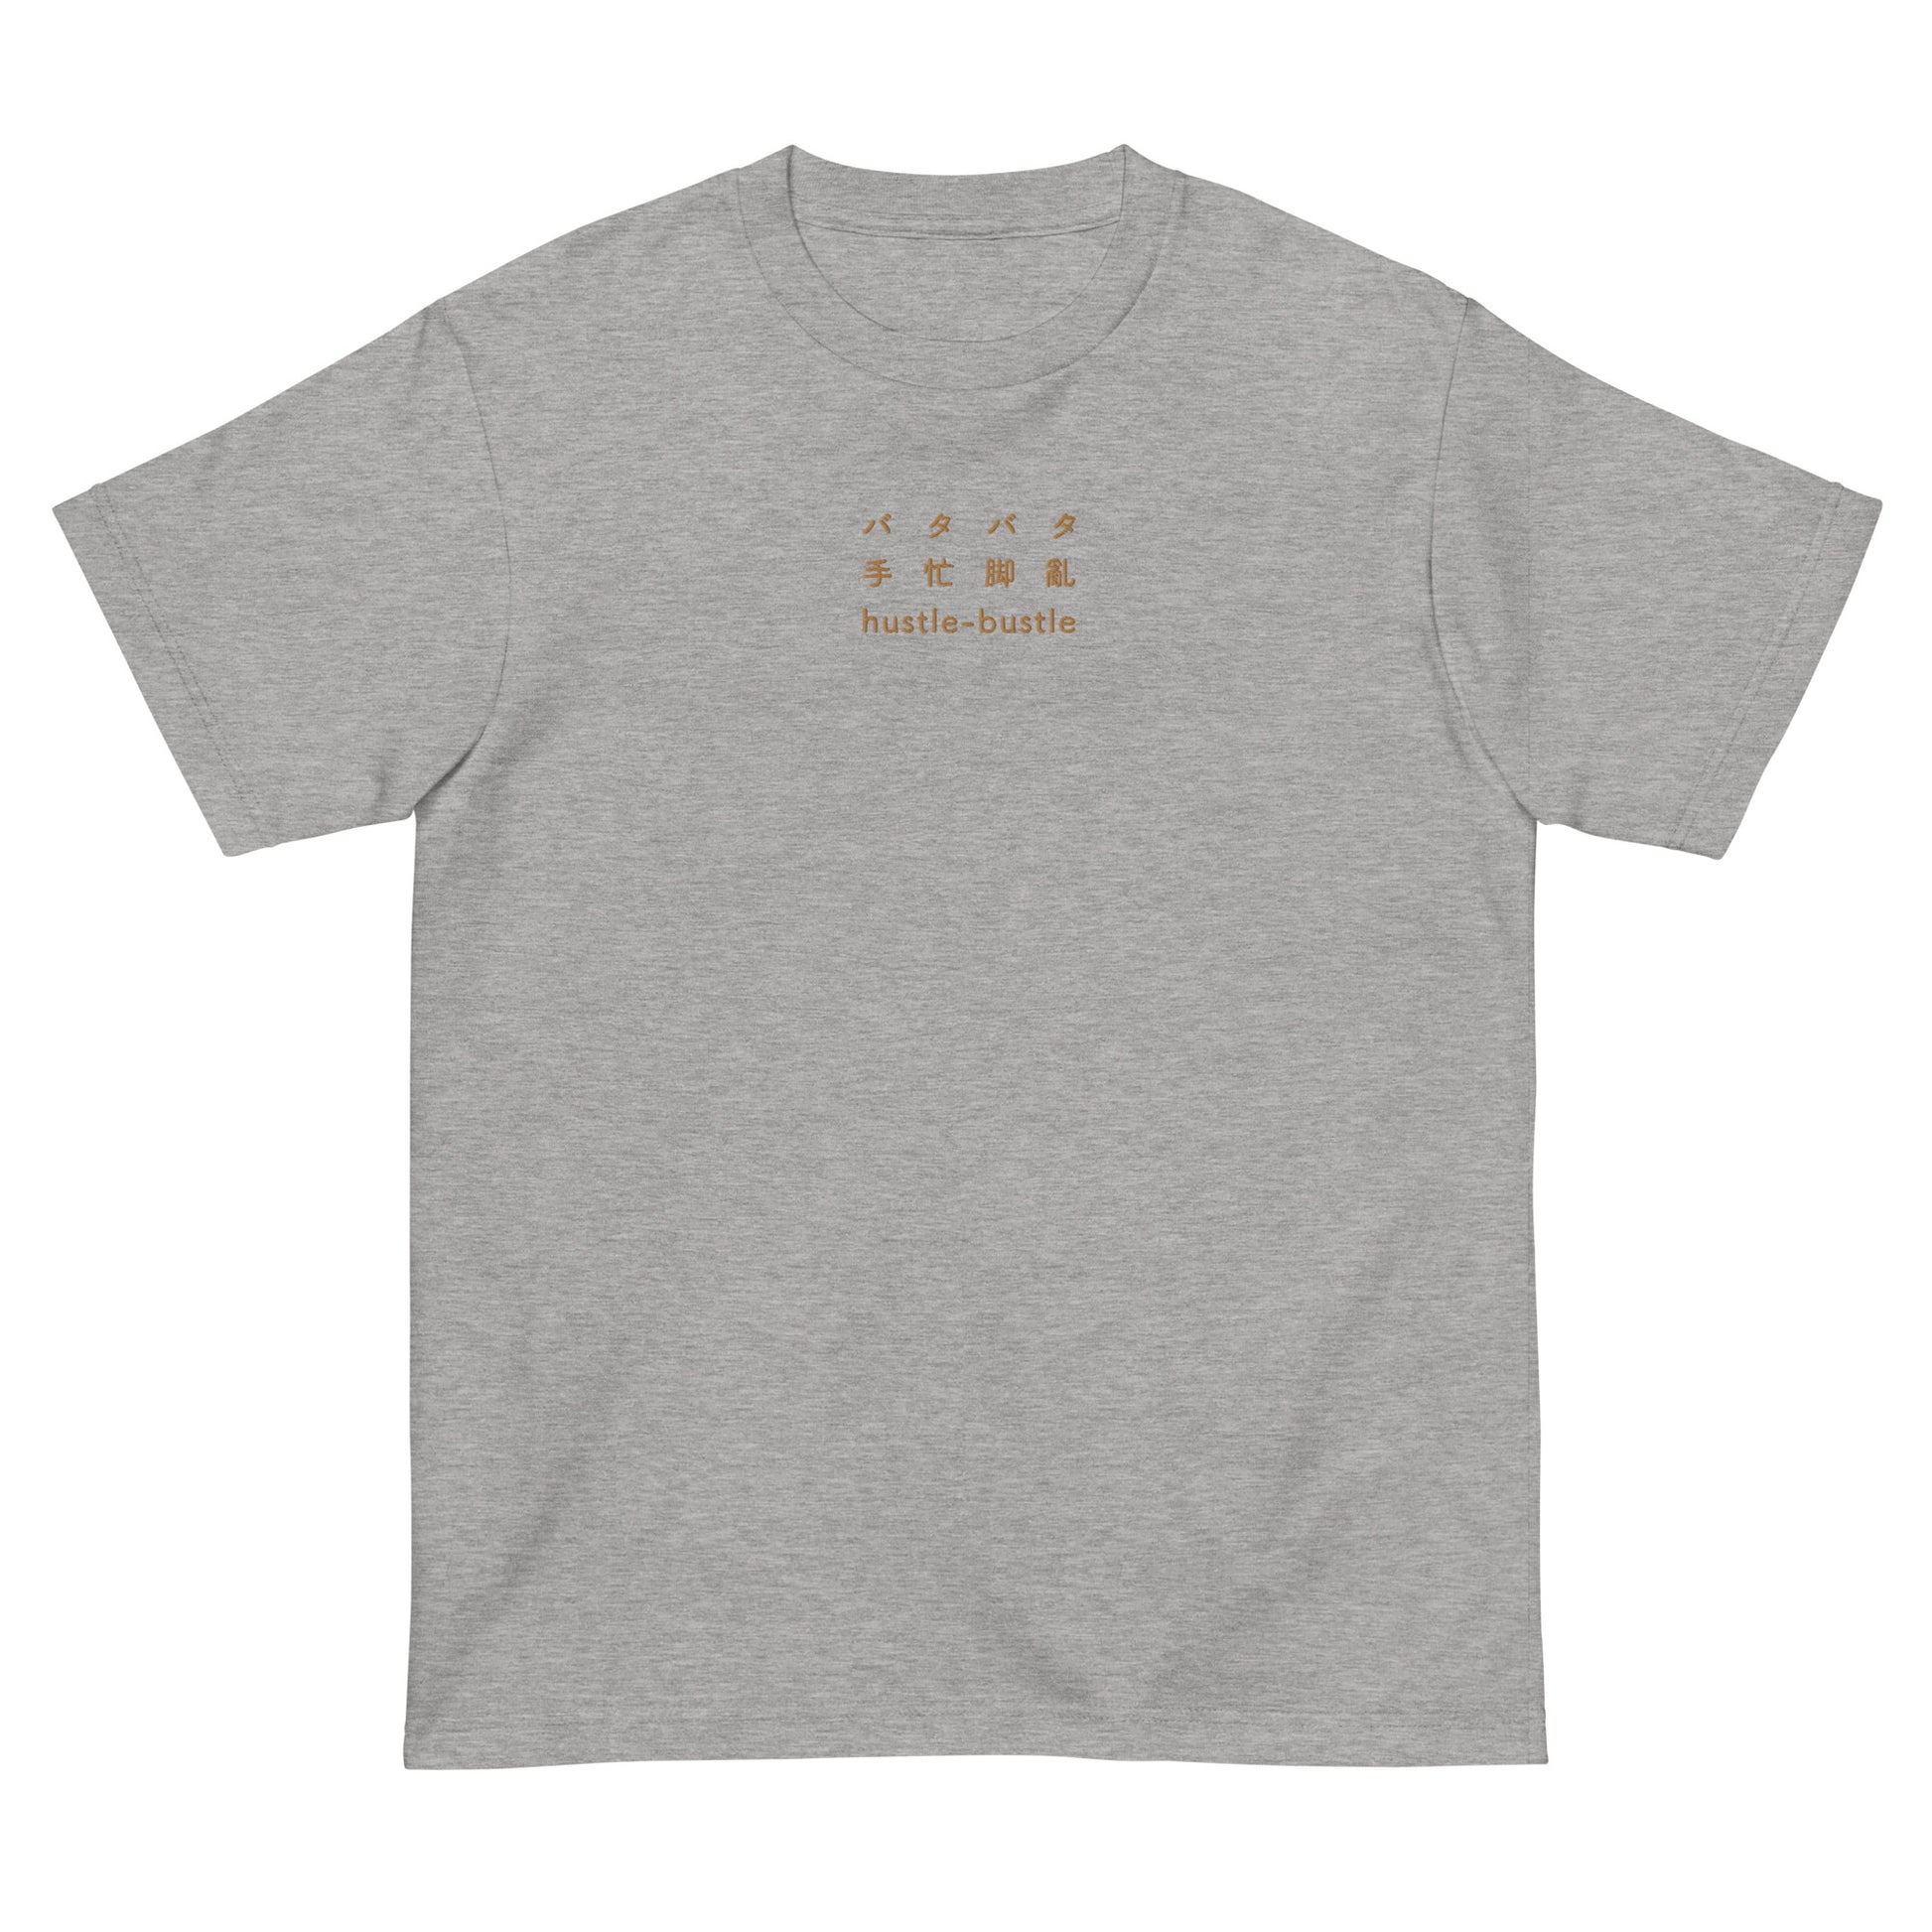 Gray High Quality Tee - Front Design with an Brown Embroidery "Hustle-Bustle" in Japanese, Chinese and English